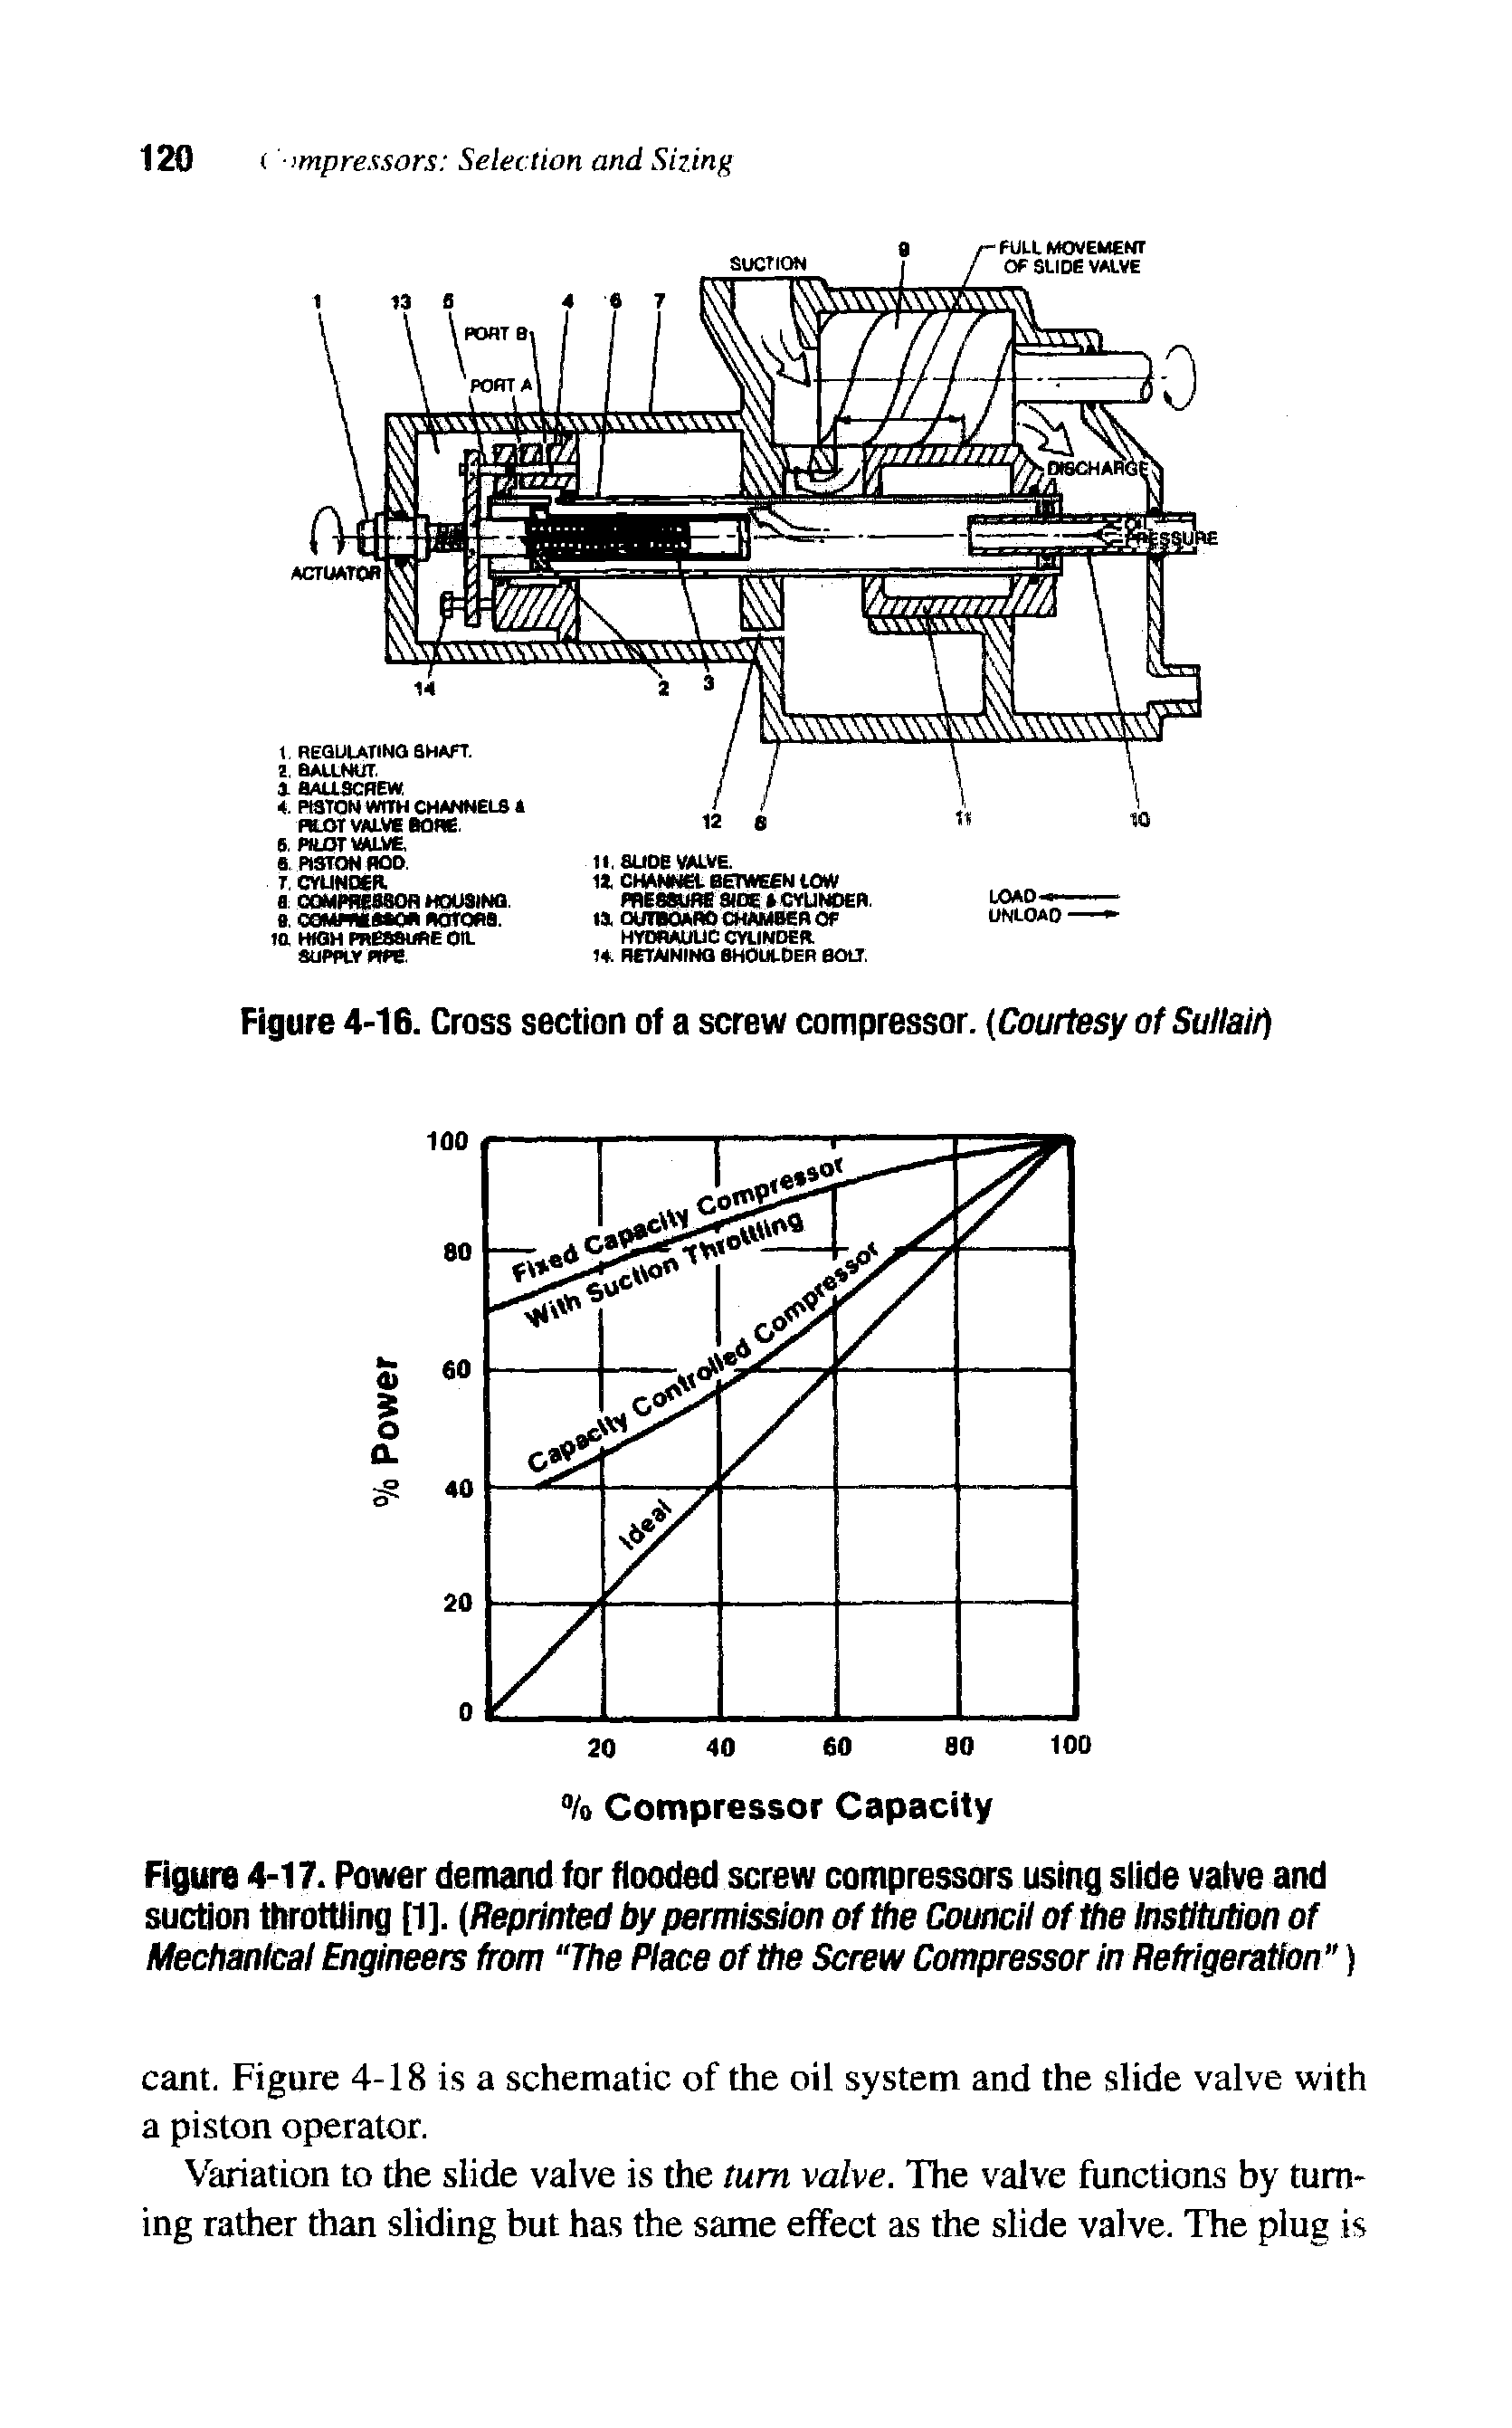 Figure 4-17. Power demand for flooded screw compressors using slide valve and suction throttling [1]. (Reprinted by permission of the Councii of the institution of Mechanical Engineers from The Place of the Screw Compressor in Refrigeration )...